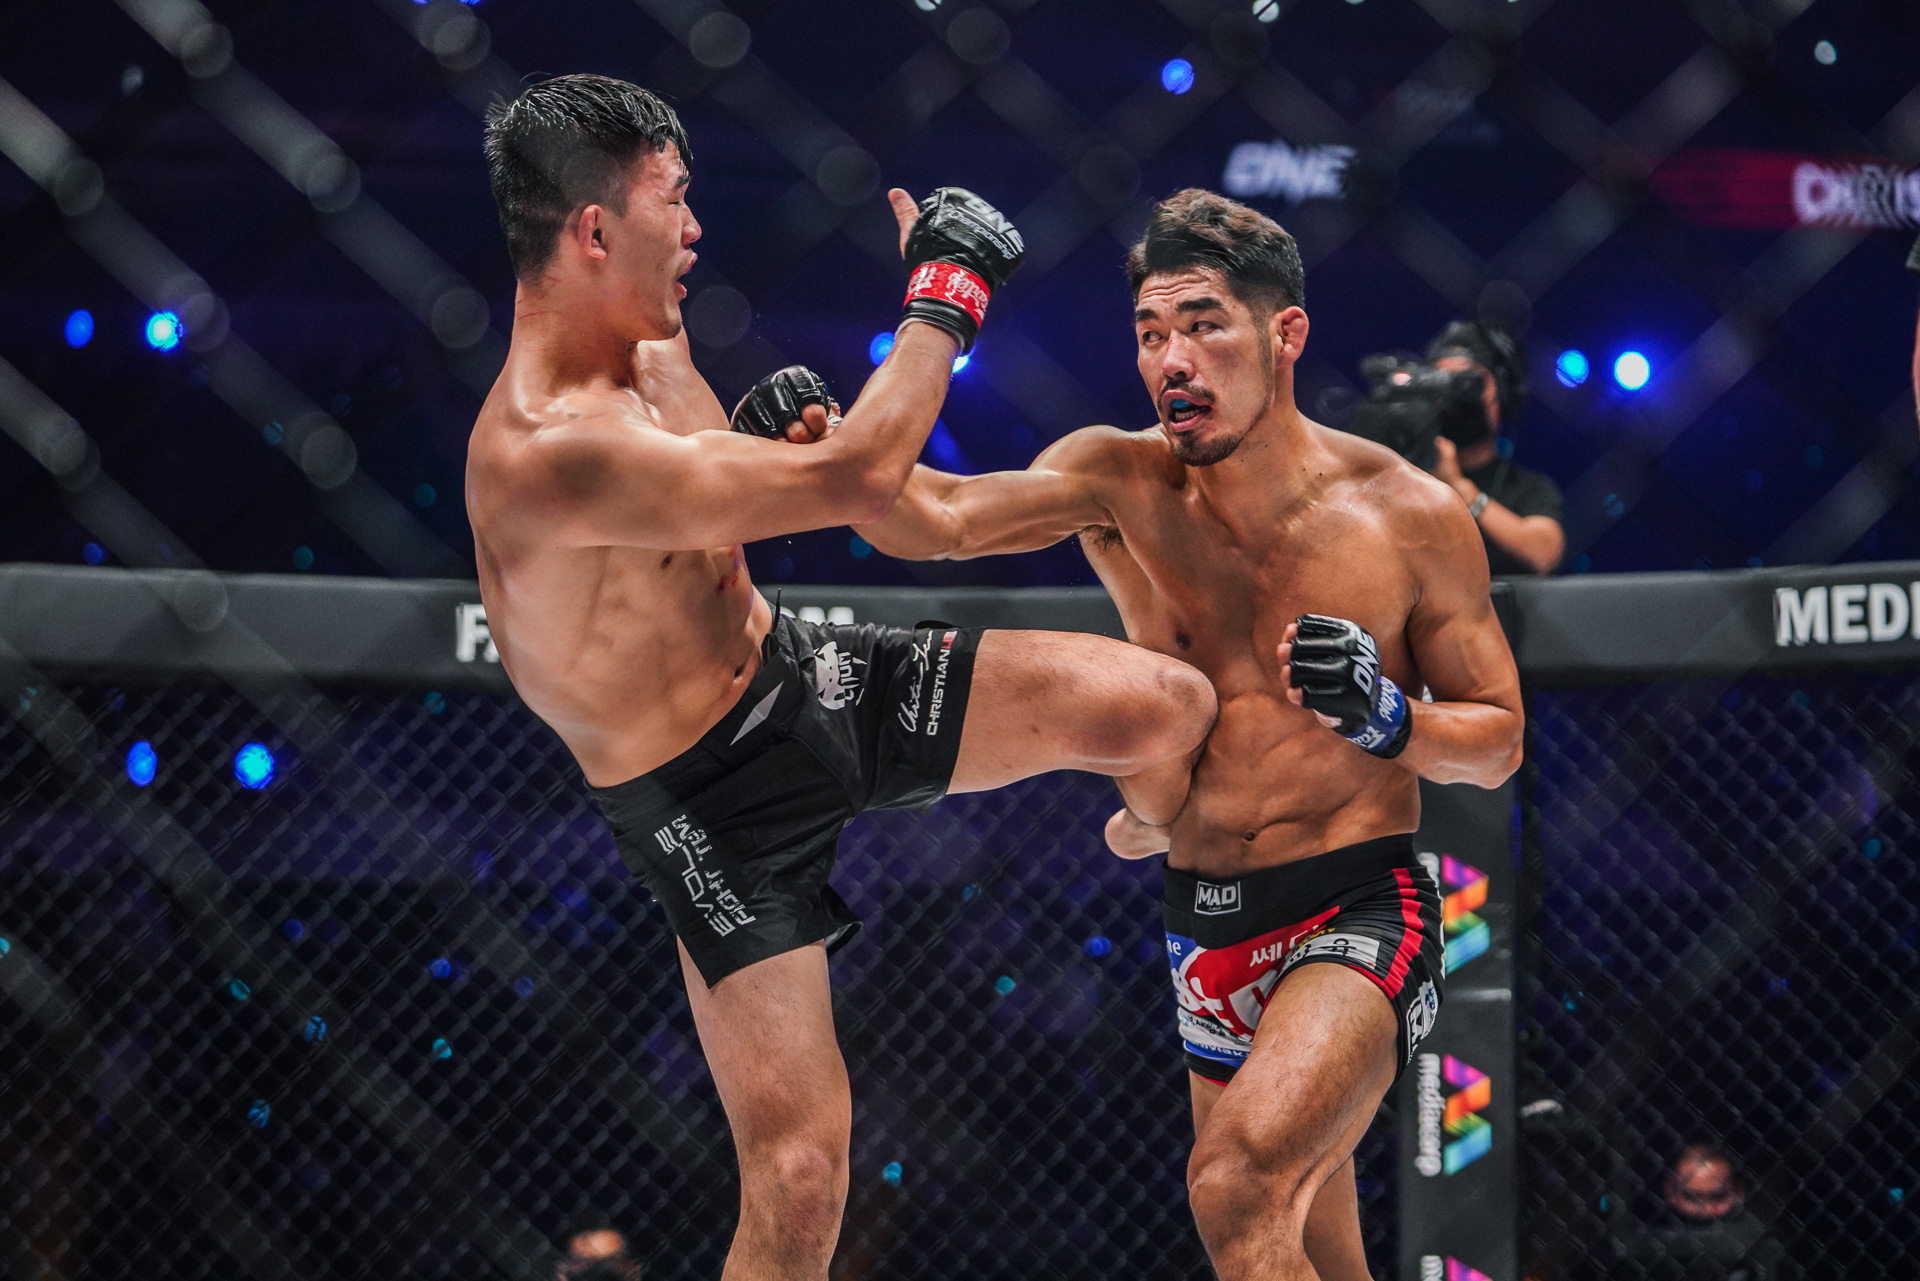 Ok Rae Yoon beats Christian Lee to win the lightweight belt at ONE: REVOLUTION